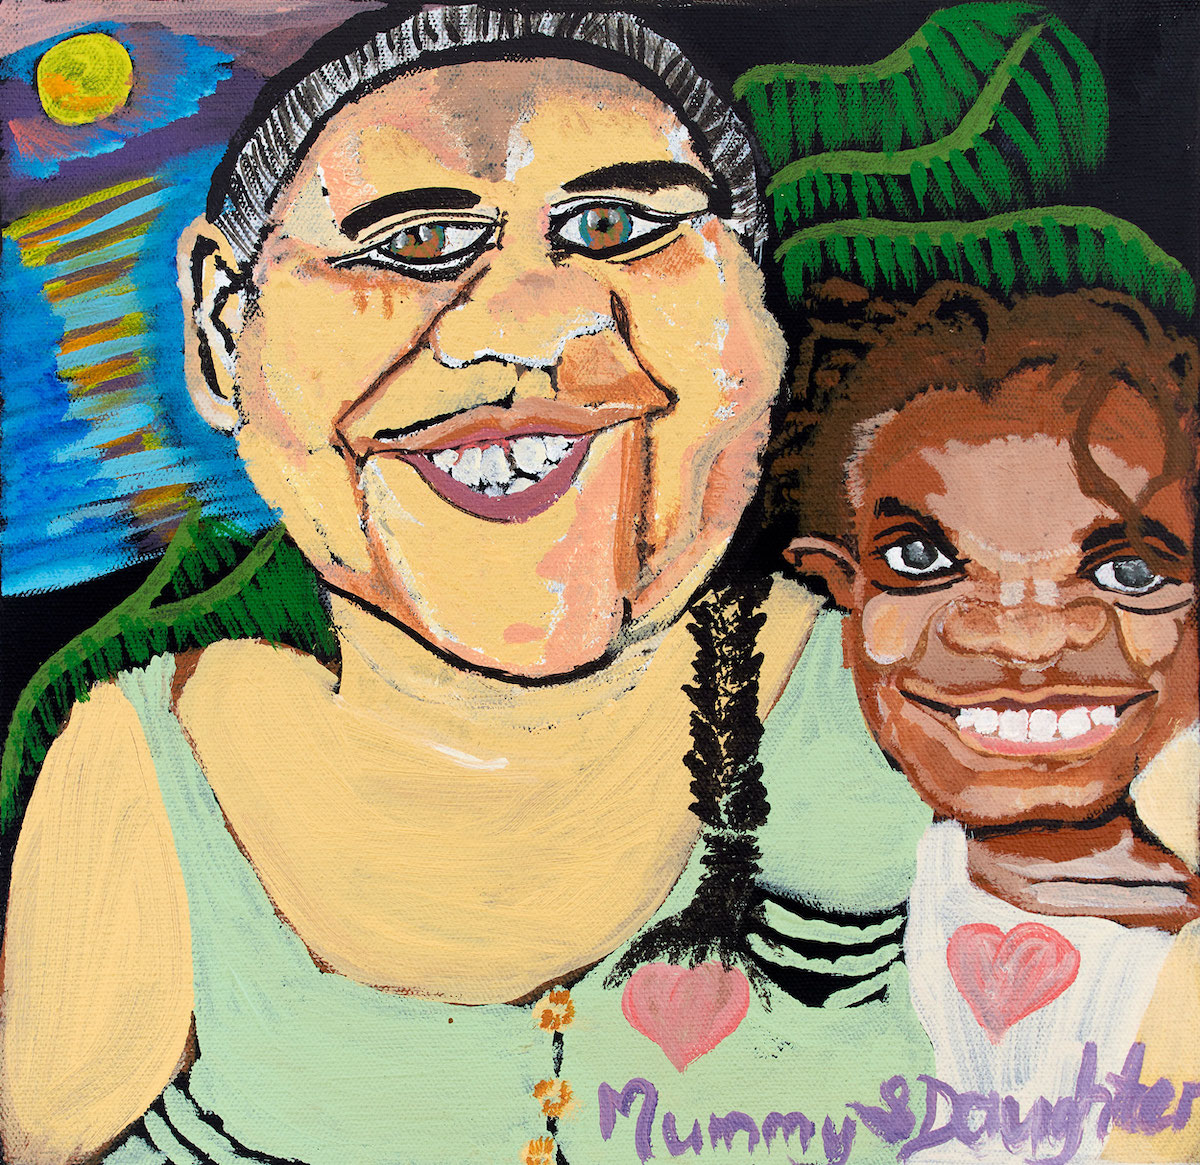 Portrait of an adult with a child against a sunset and palm tree background, with the words "Mummy & Daughter" written in purple at the bottom right below two pink love hearts